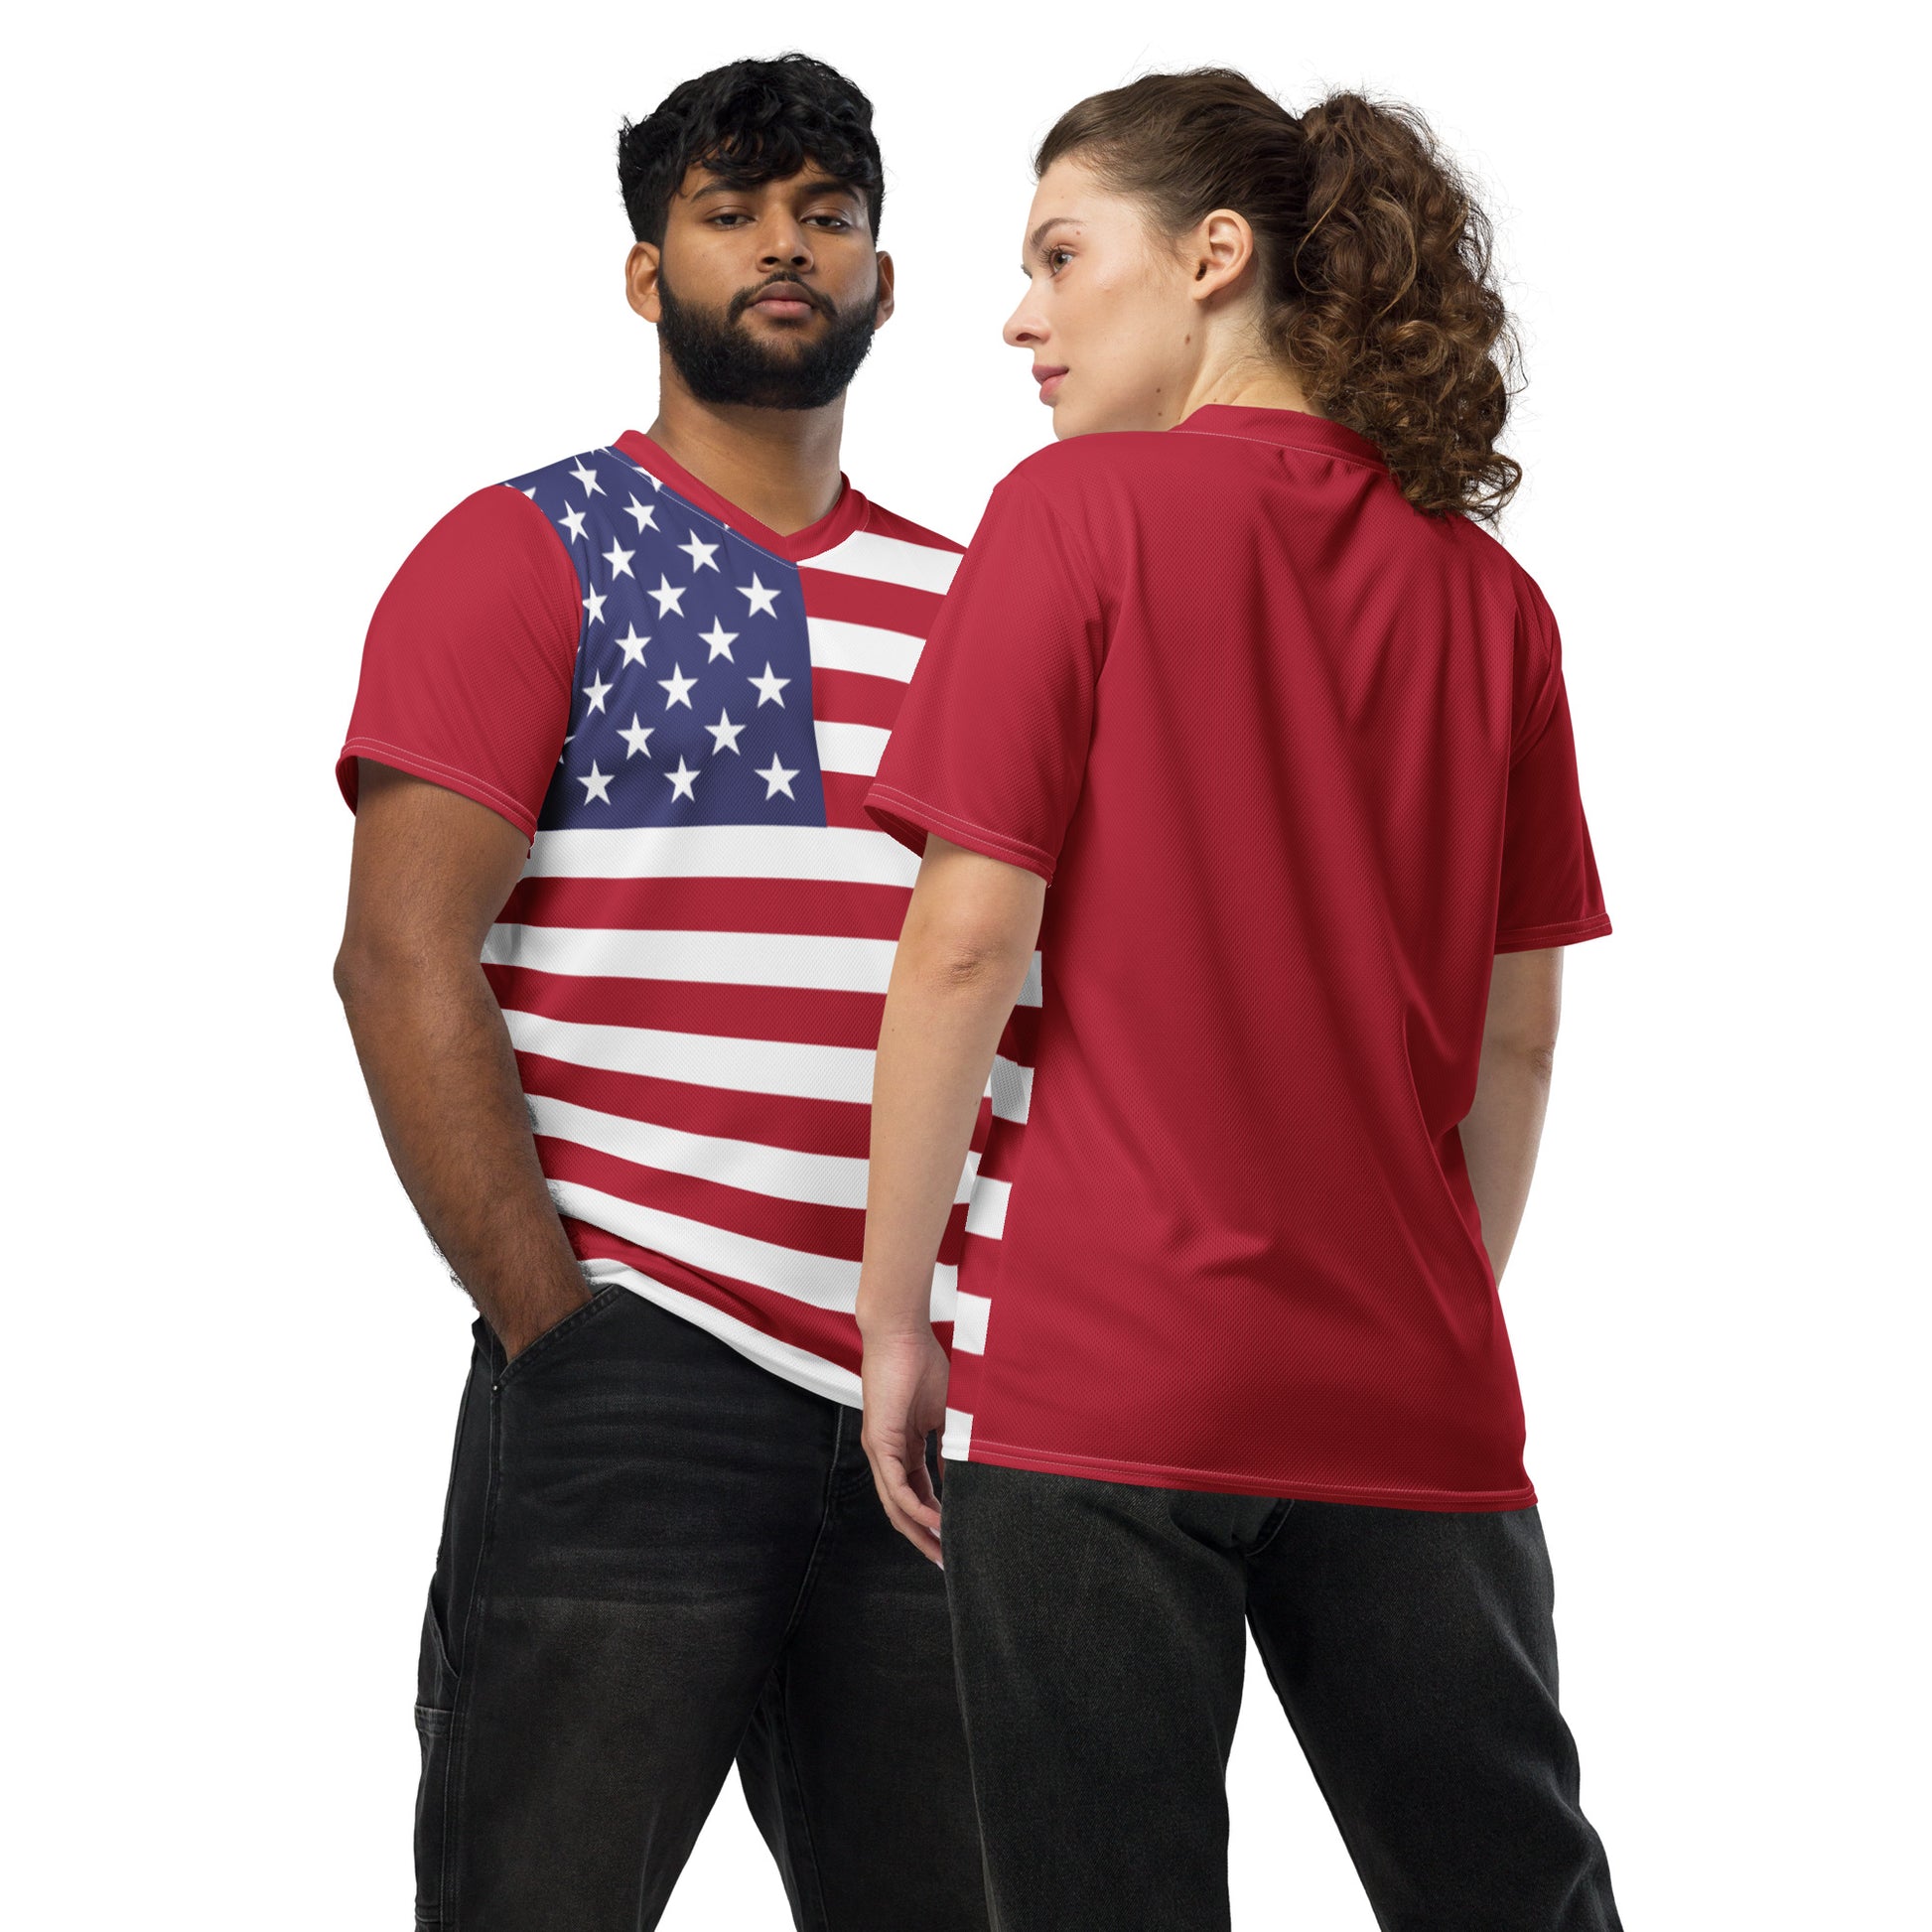 USA Flag Recycled Polyester Unisex Sports Jersey Sizes 2XS - 6XL